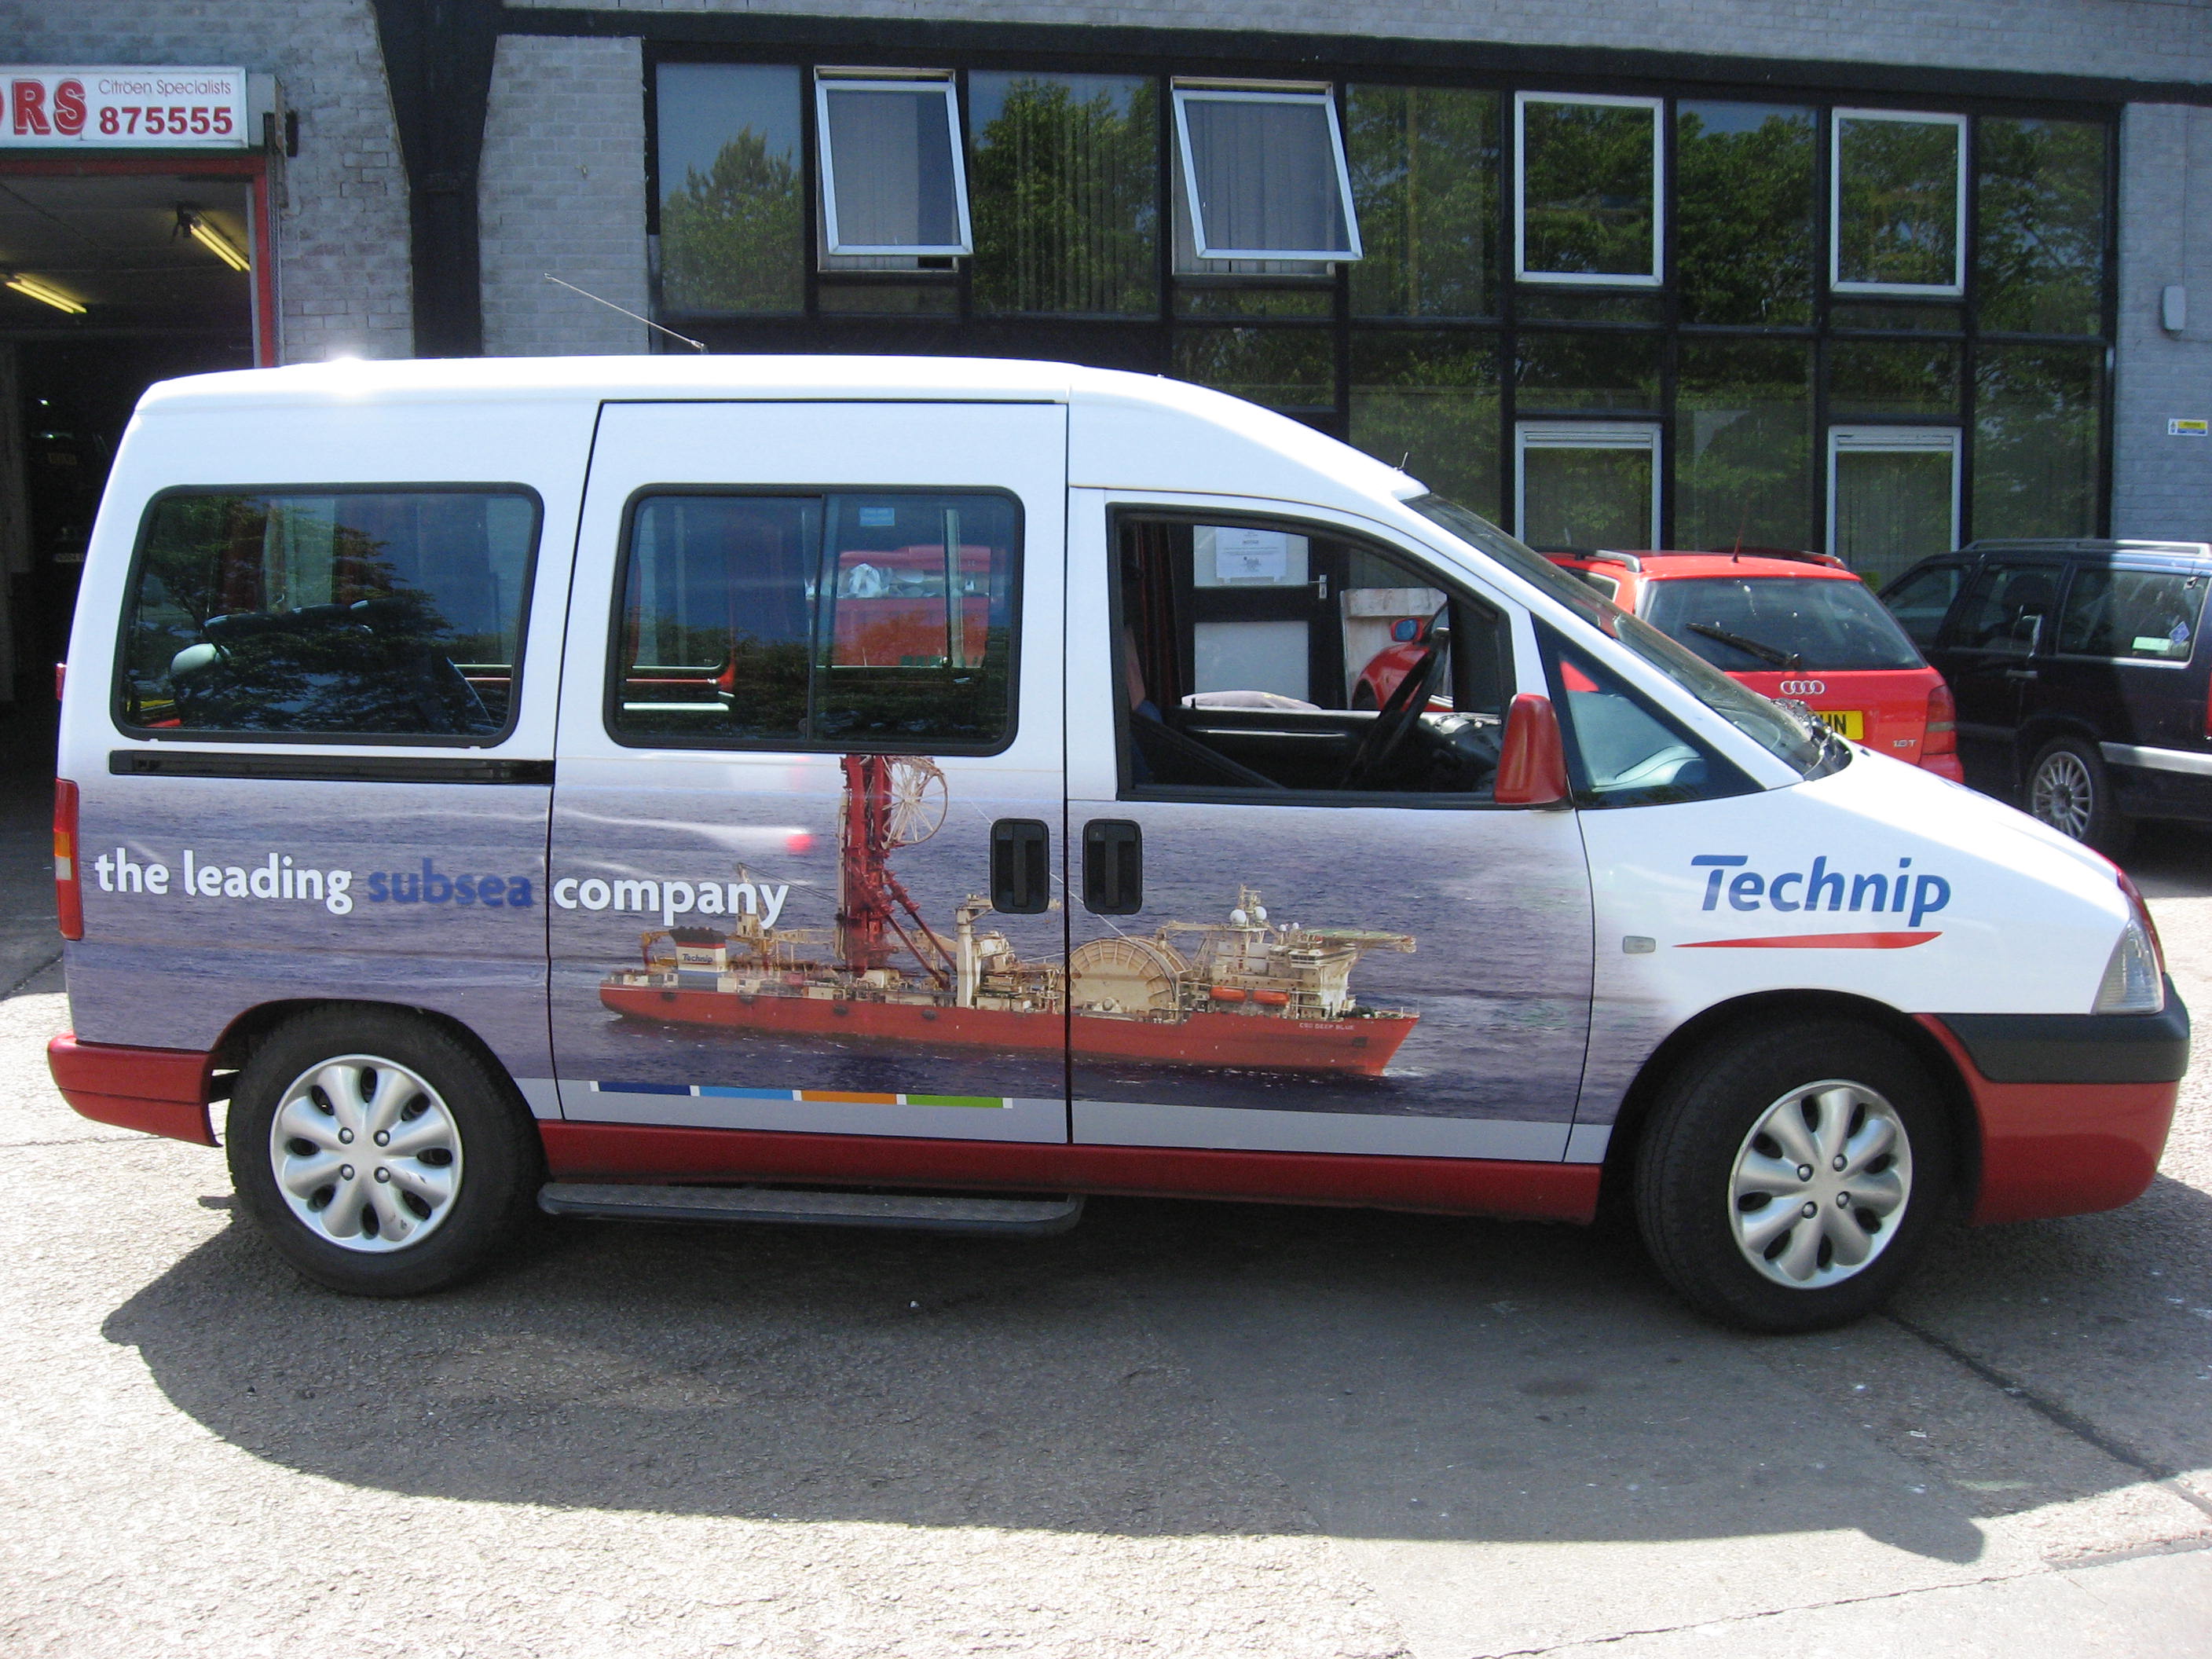 2009 Ubiquitous taxi advertising campaign for Technip - The leading subsea company